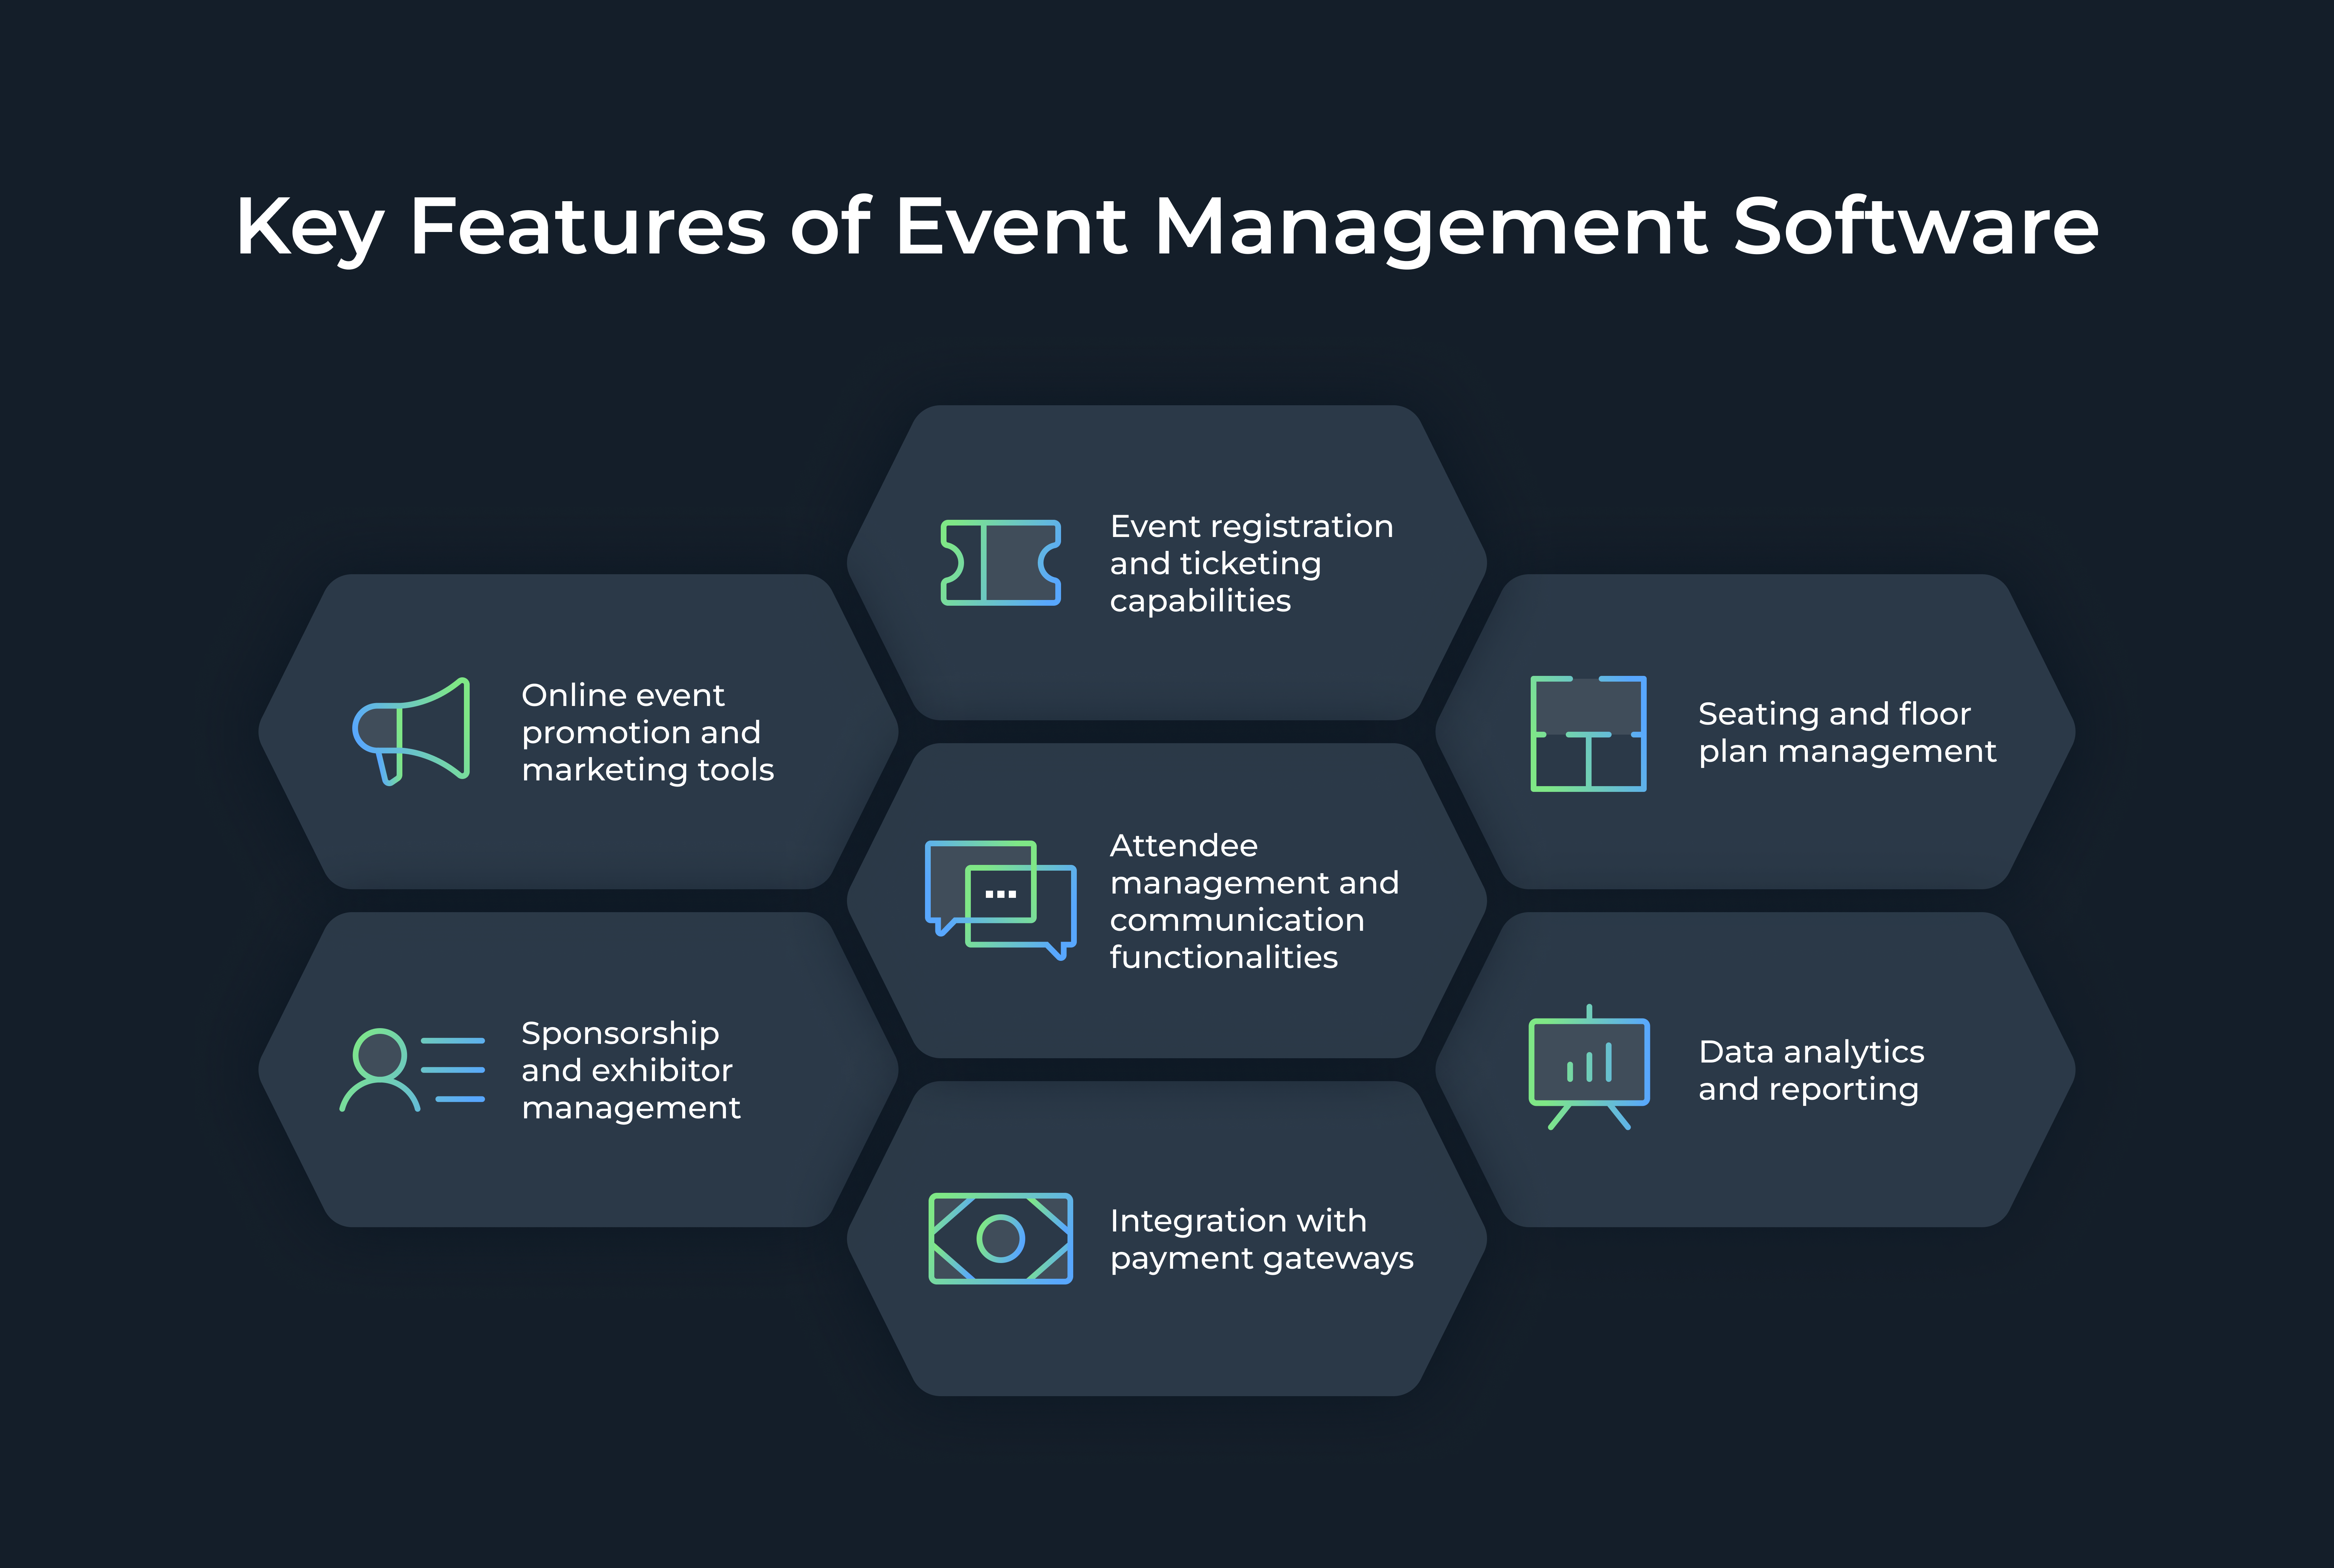 Key Features of Event Management Software: Event registration and ticketing capabilities; Online event promotion and marketing tools; Attendee management and communication functionalities; Seating and floor plan management; Sponsorship and exhibitor management; Integration with payment gateways; Data analytics and reporting.